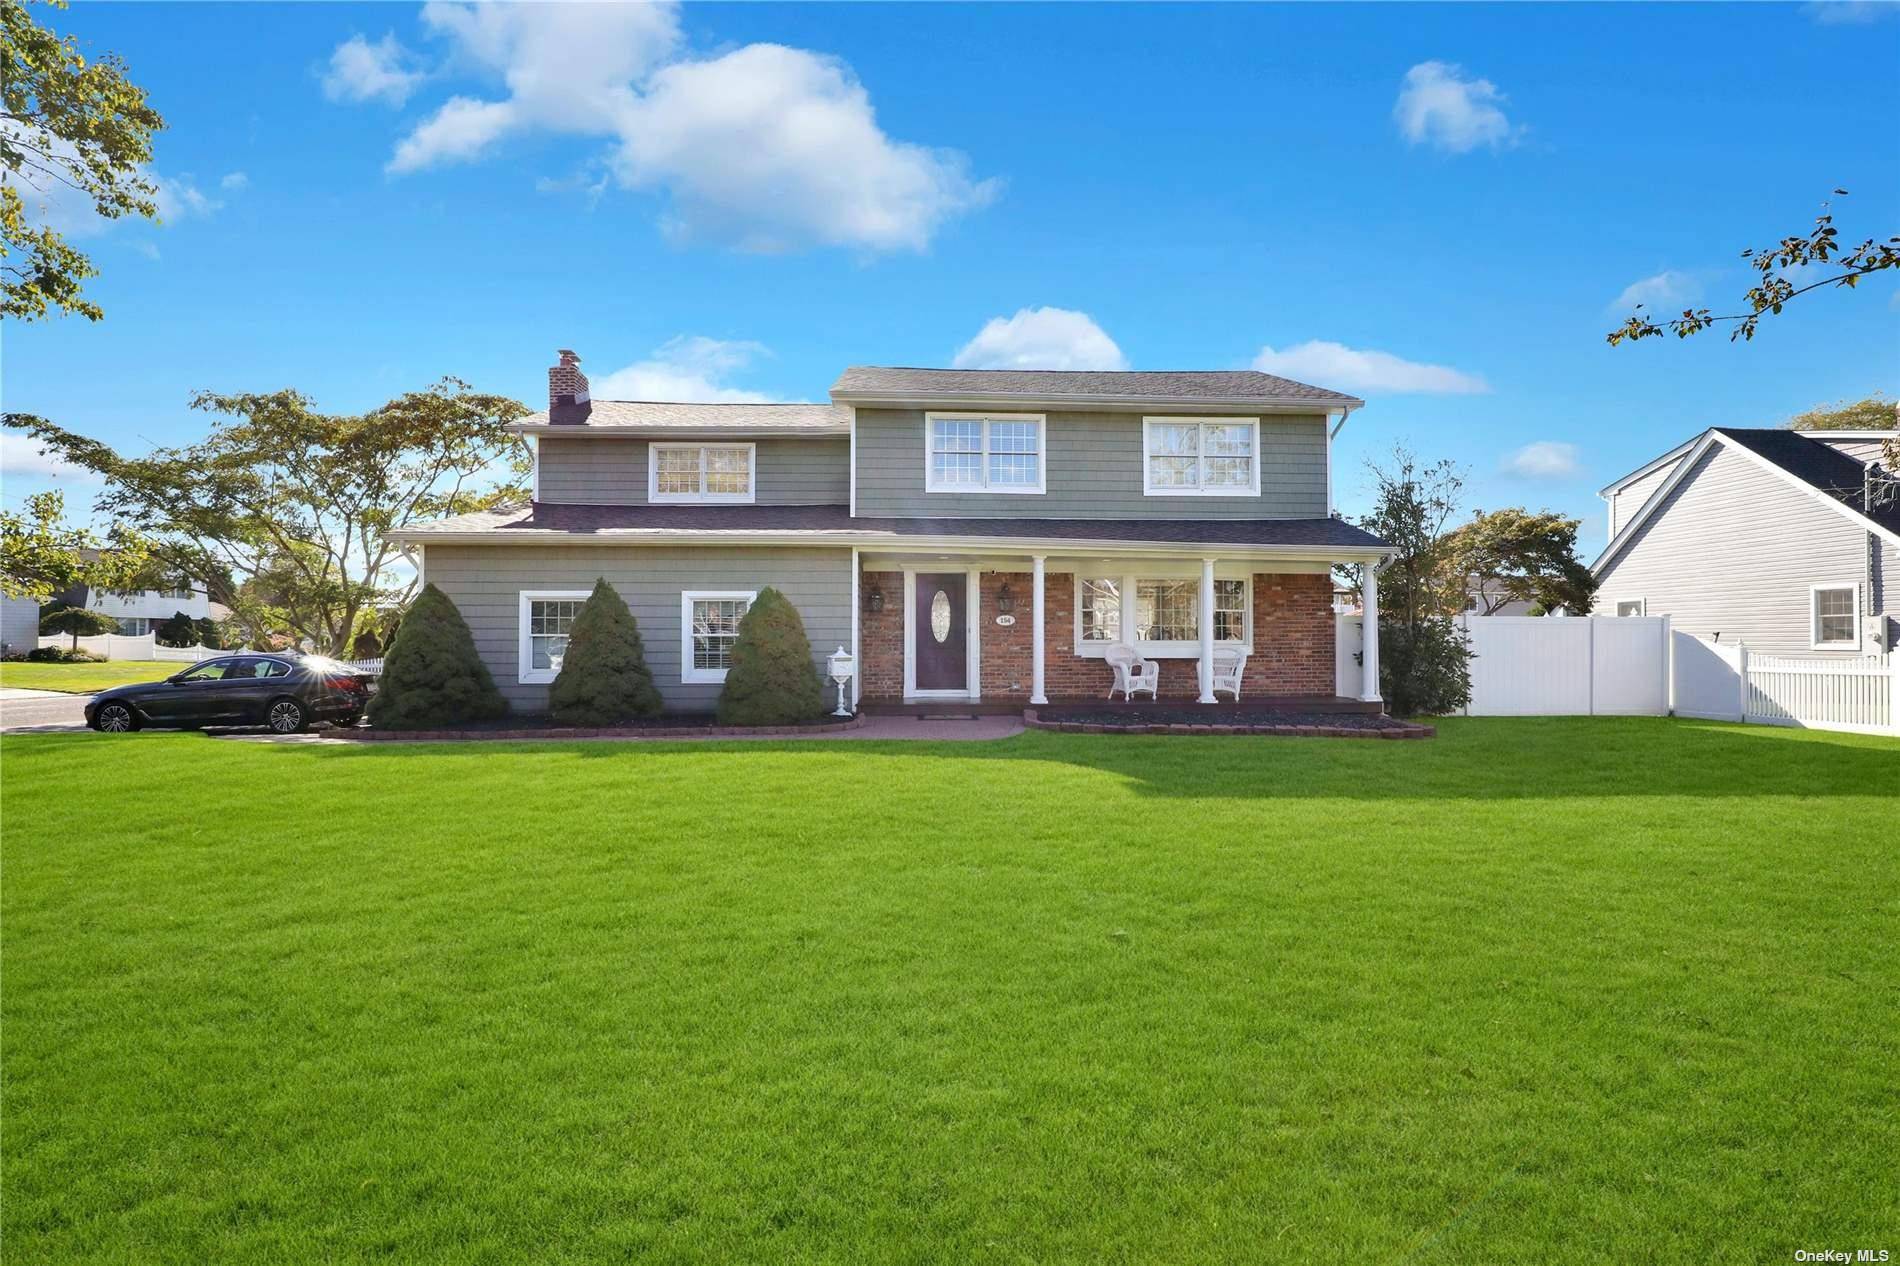 Welcome to beautiful South Sayville Colonial with spectacular views of the water and only 15 minutes away from Fire Island.